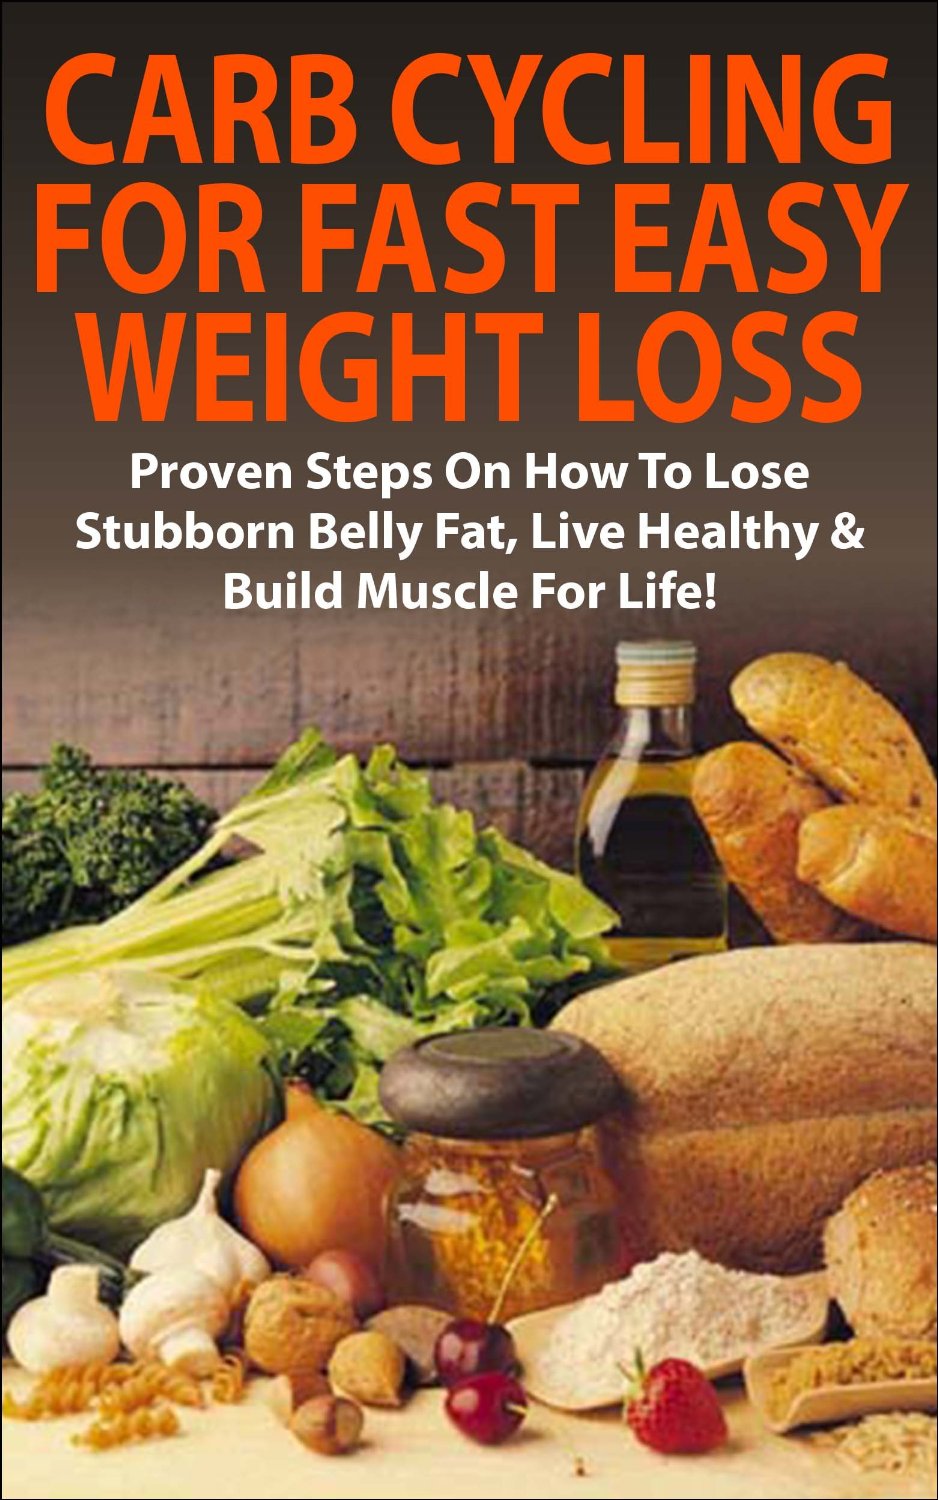 Carb Cycling for Fast Easy Weight Loss by Lindsey Pylarinos